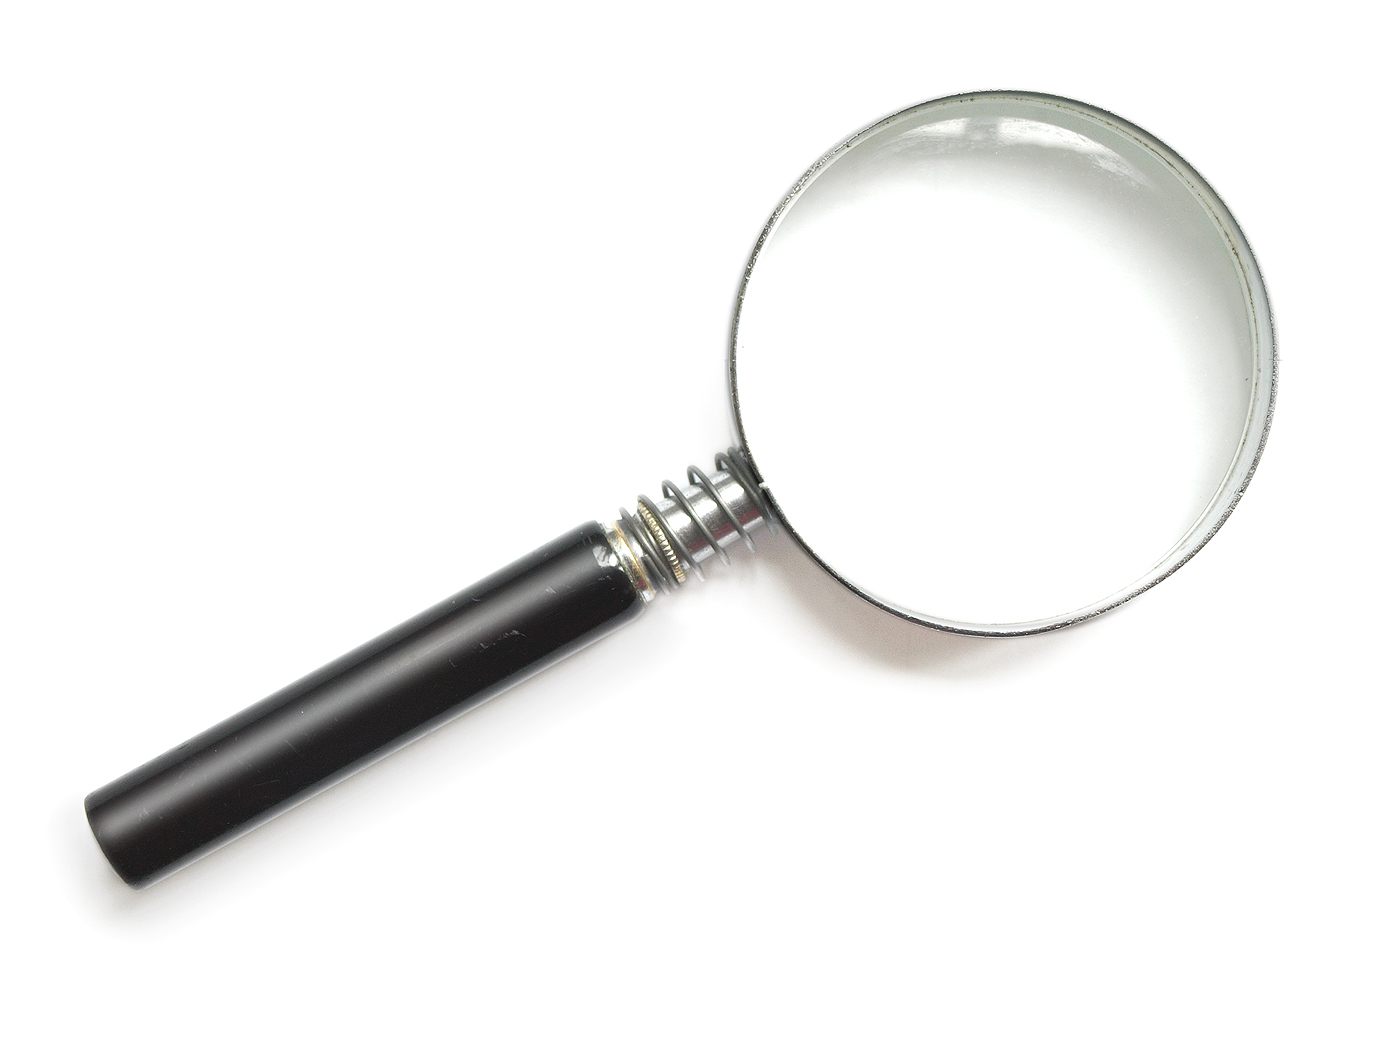 magnifying_glass